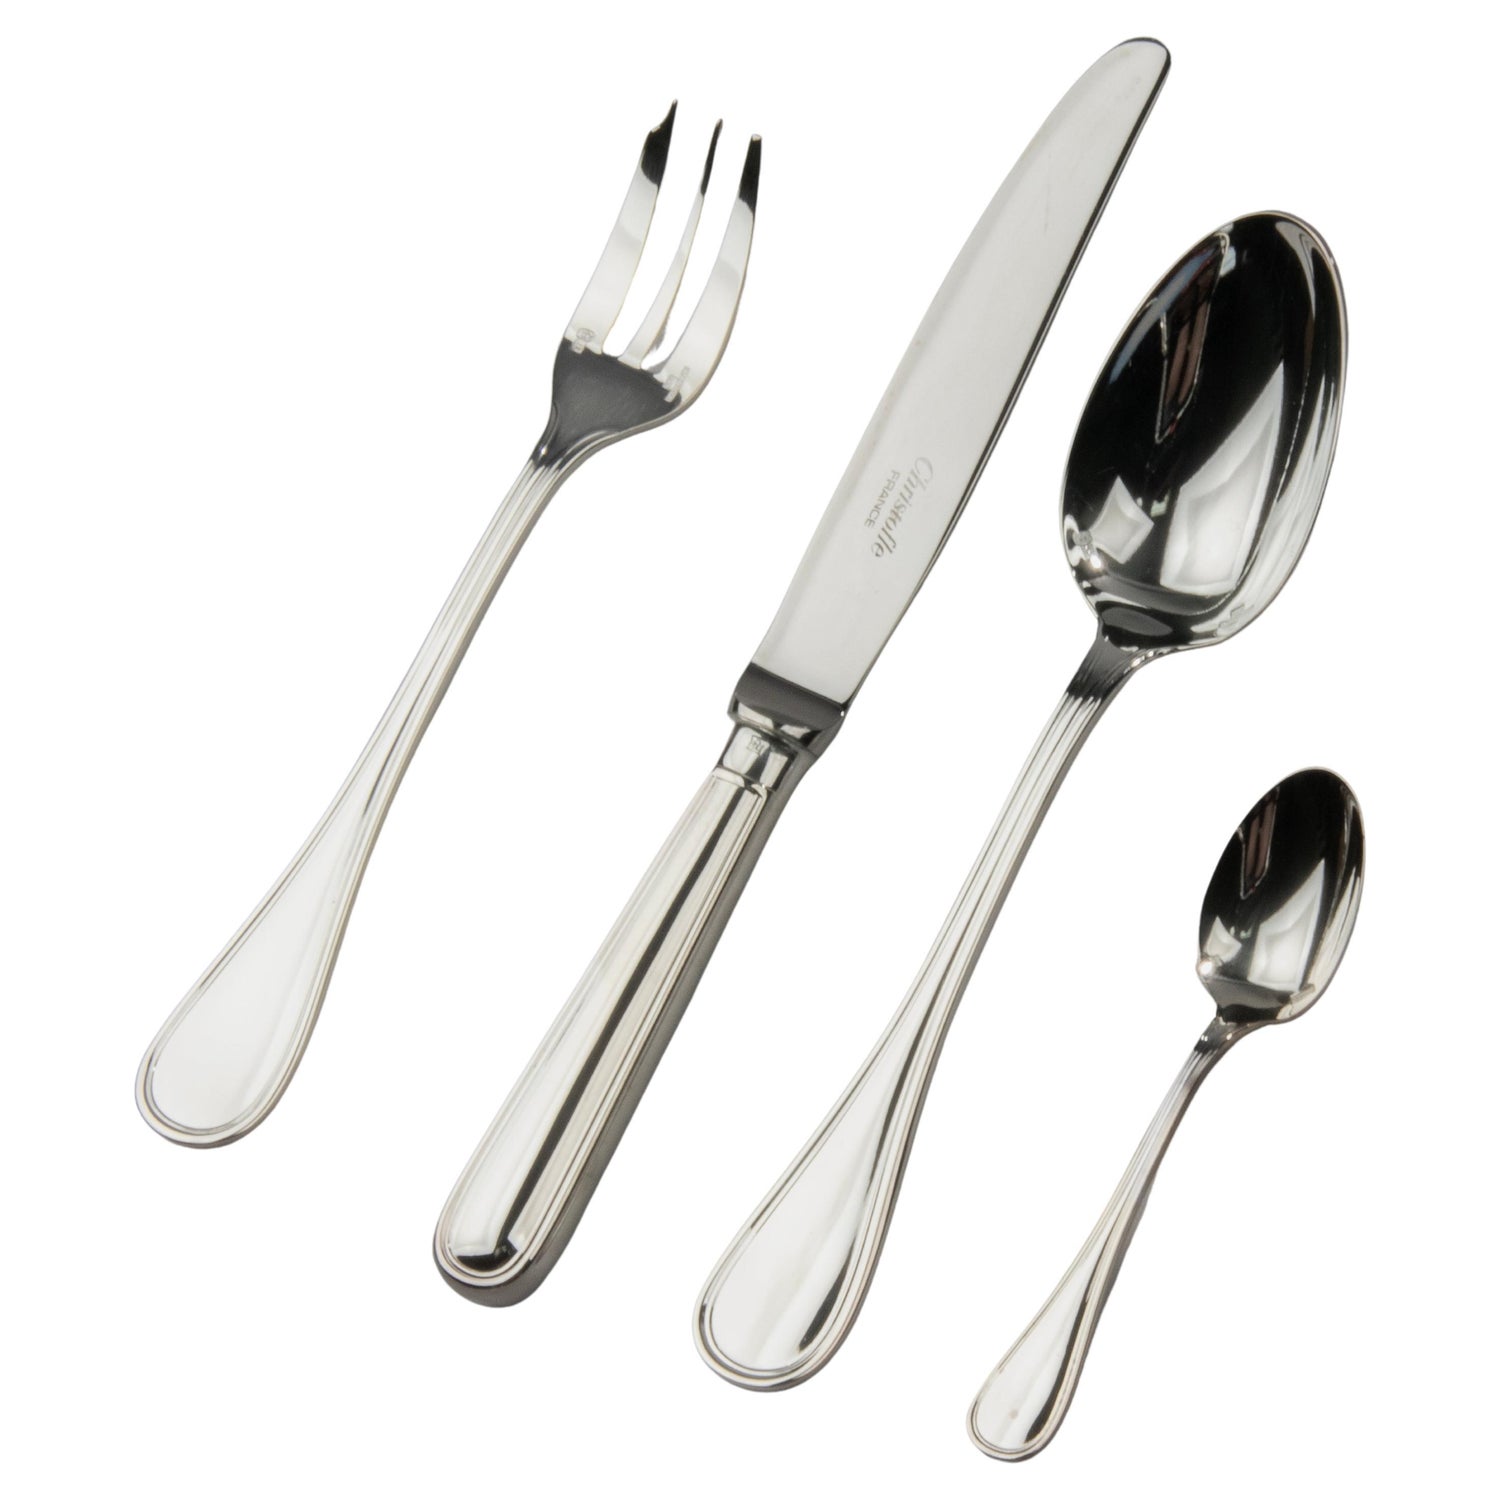 Christofle Silverplate Flatware Set in Marly Pattern 119 Pieces